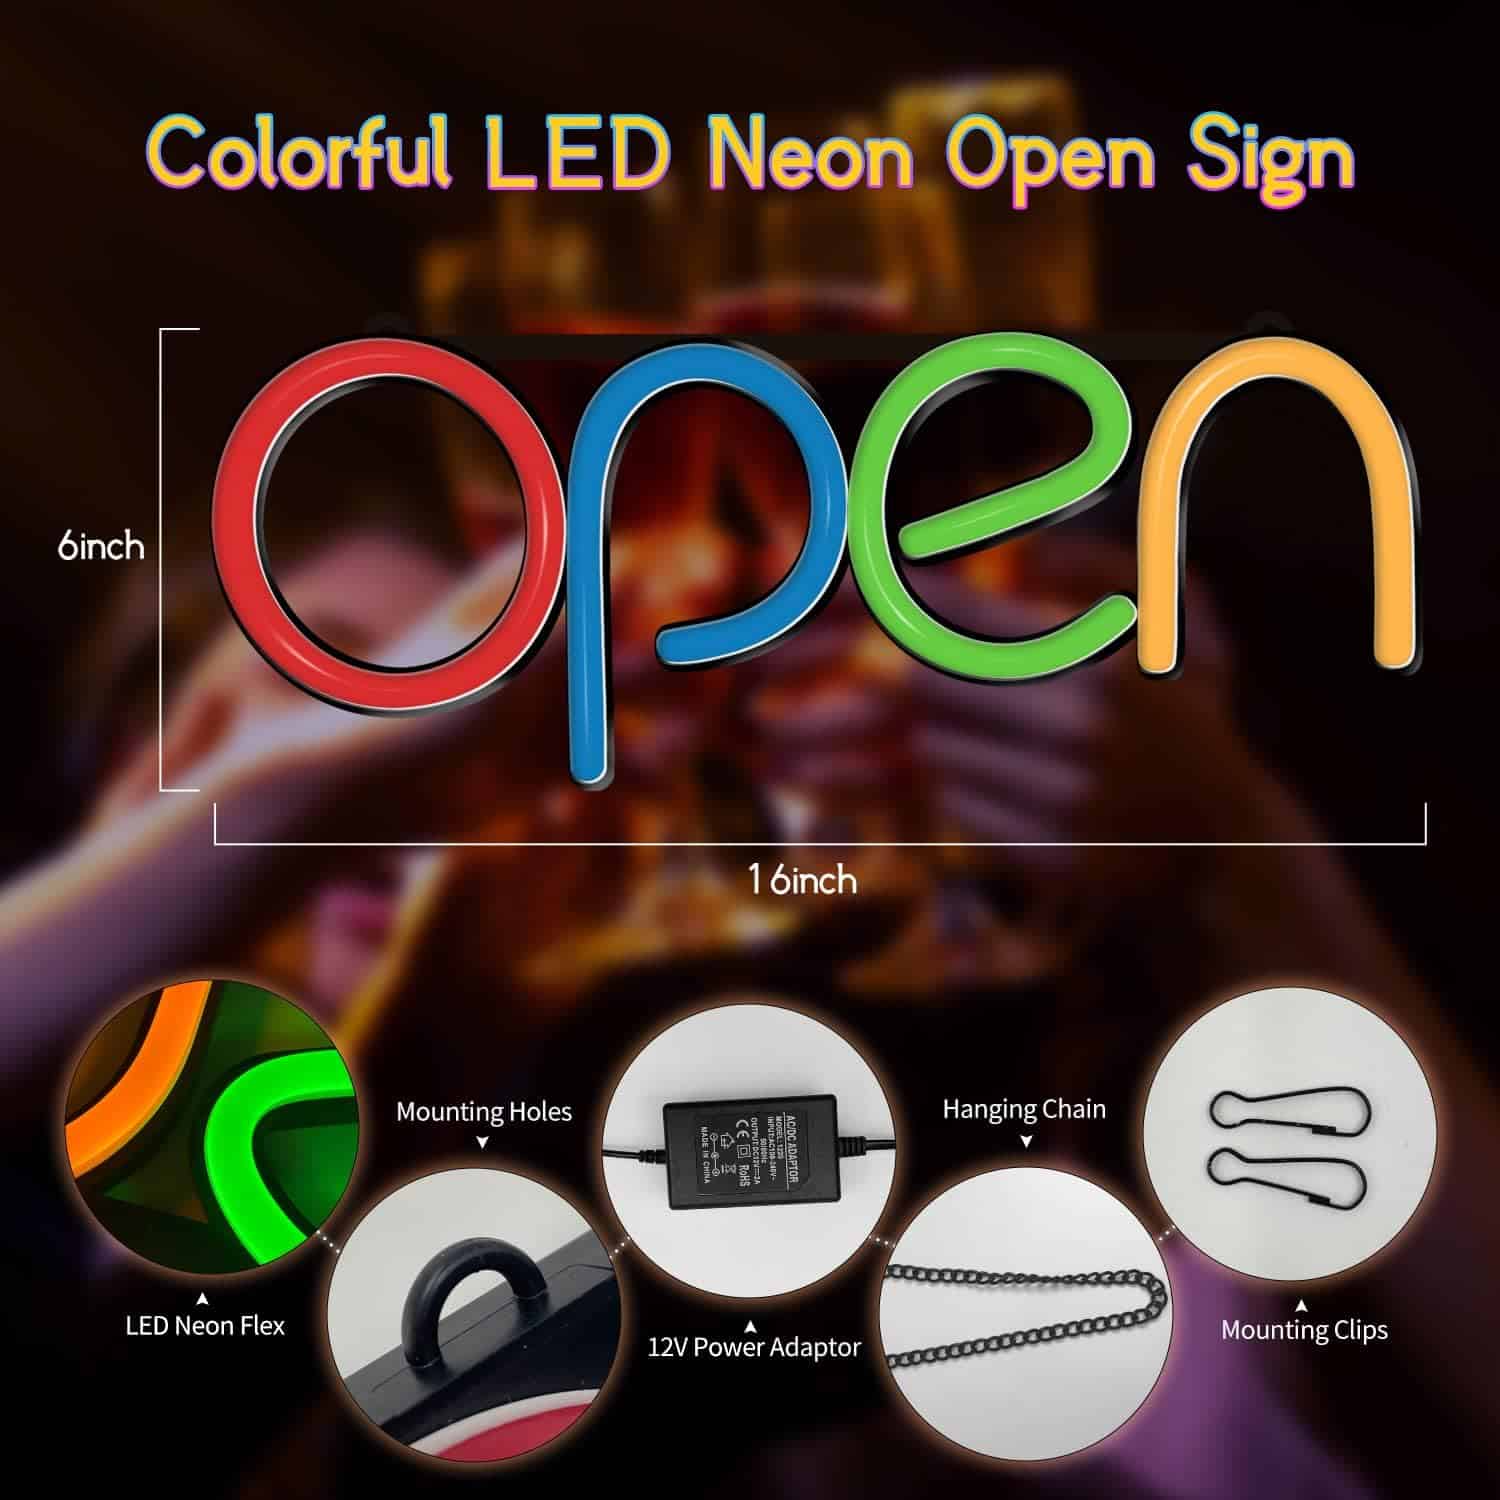 Tekstap Neon Open Sign for Business Window, RGB Color Changing LED Open Sign Vertical, 17x4 inches Open Sign Lighted with Remote Control  Power Adapter for Storefront/Business Window Restaurant/Bar